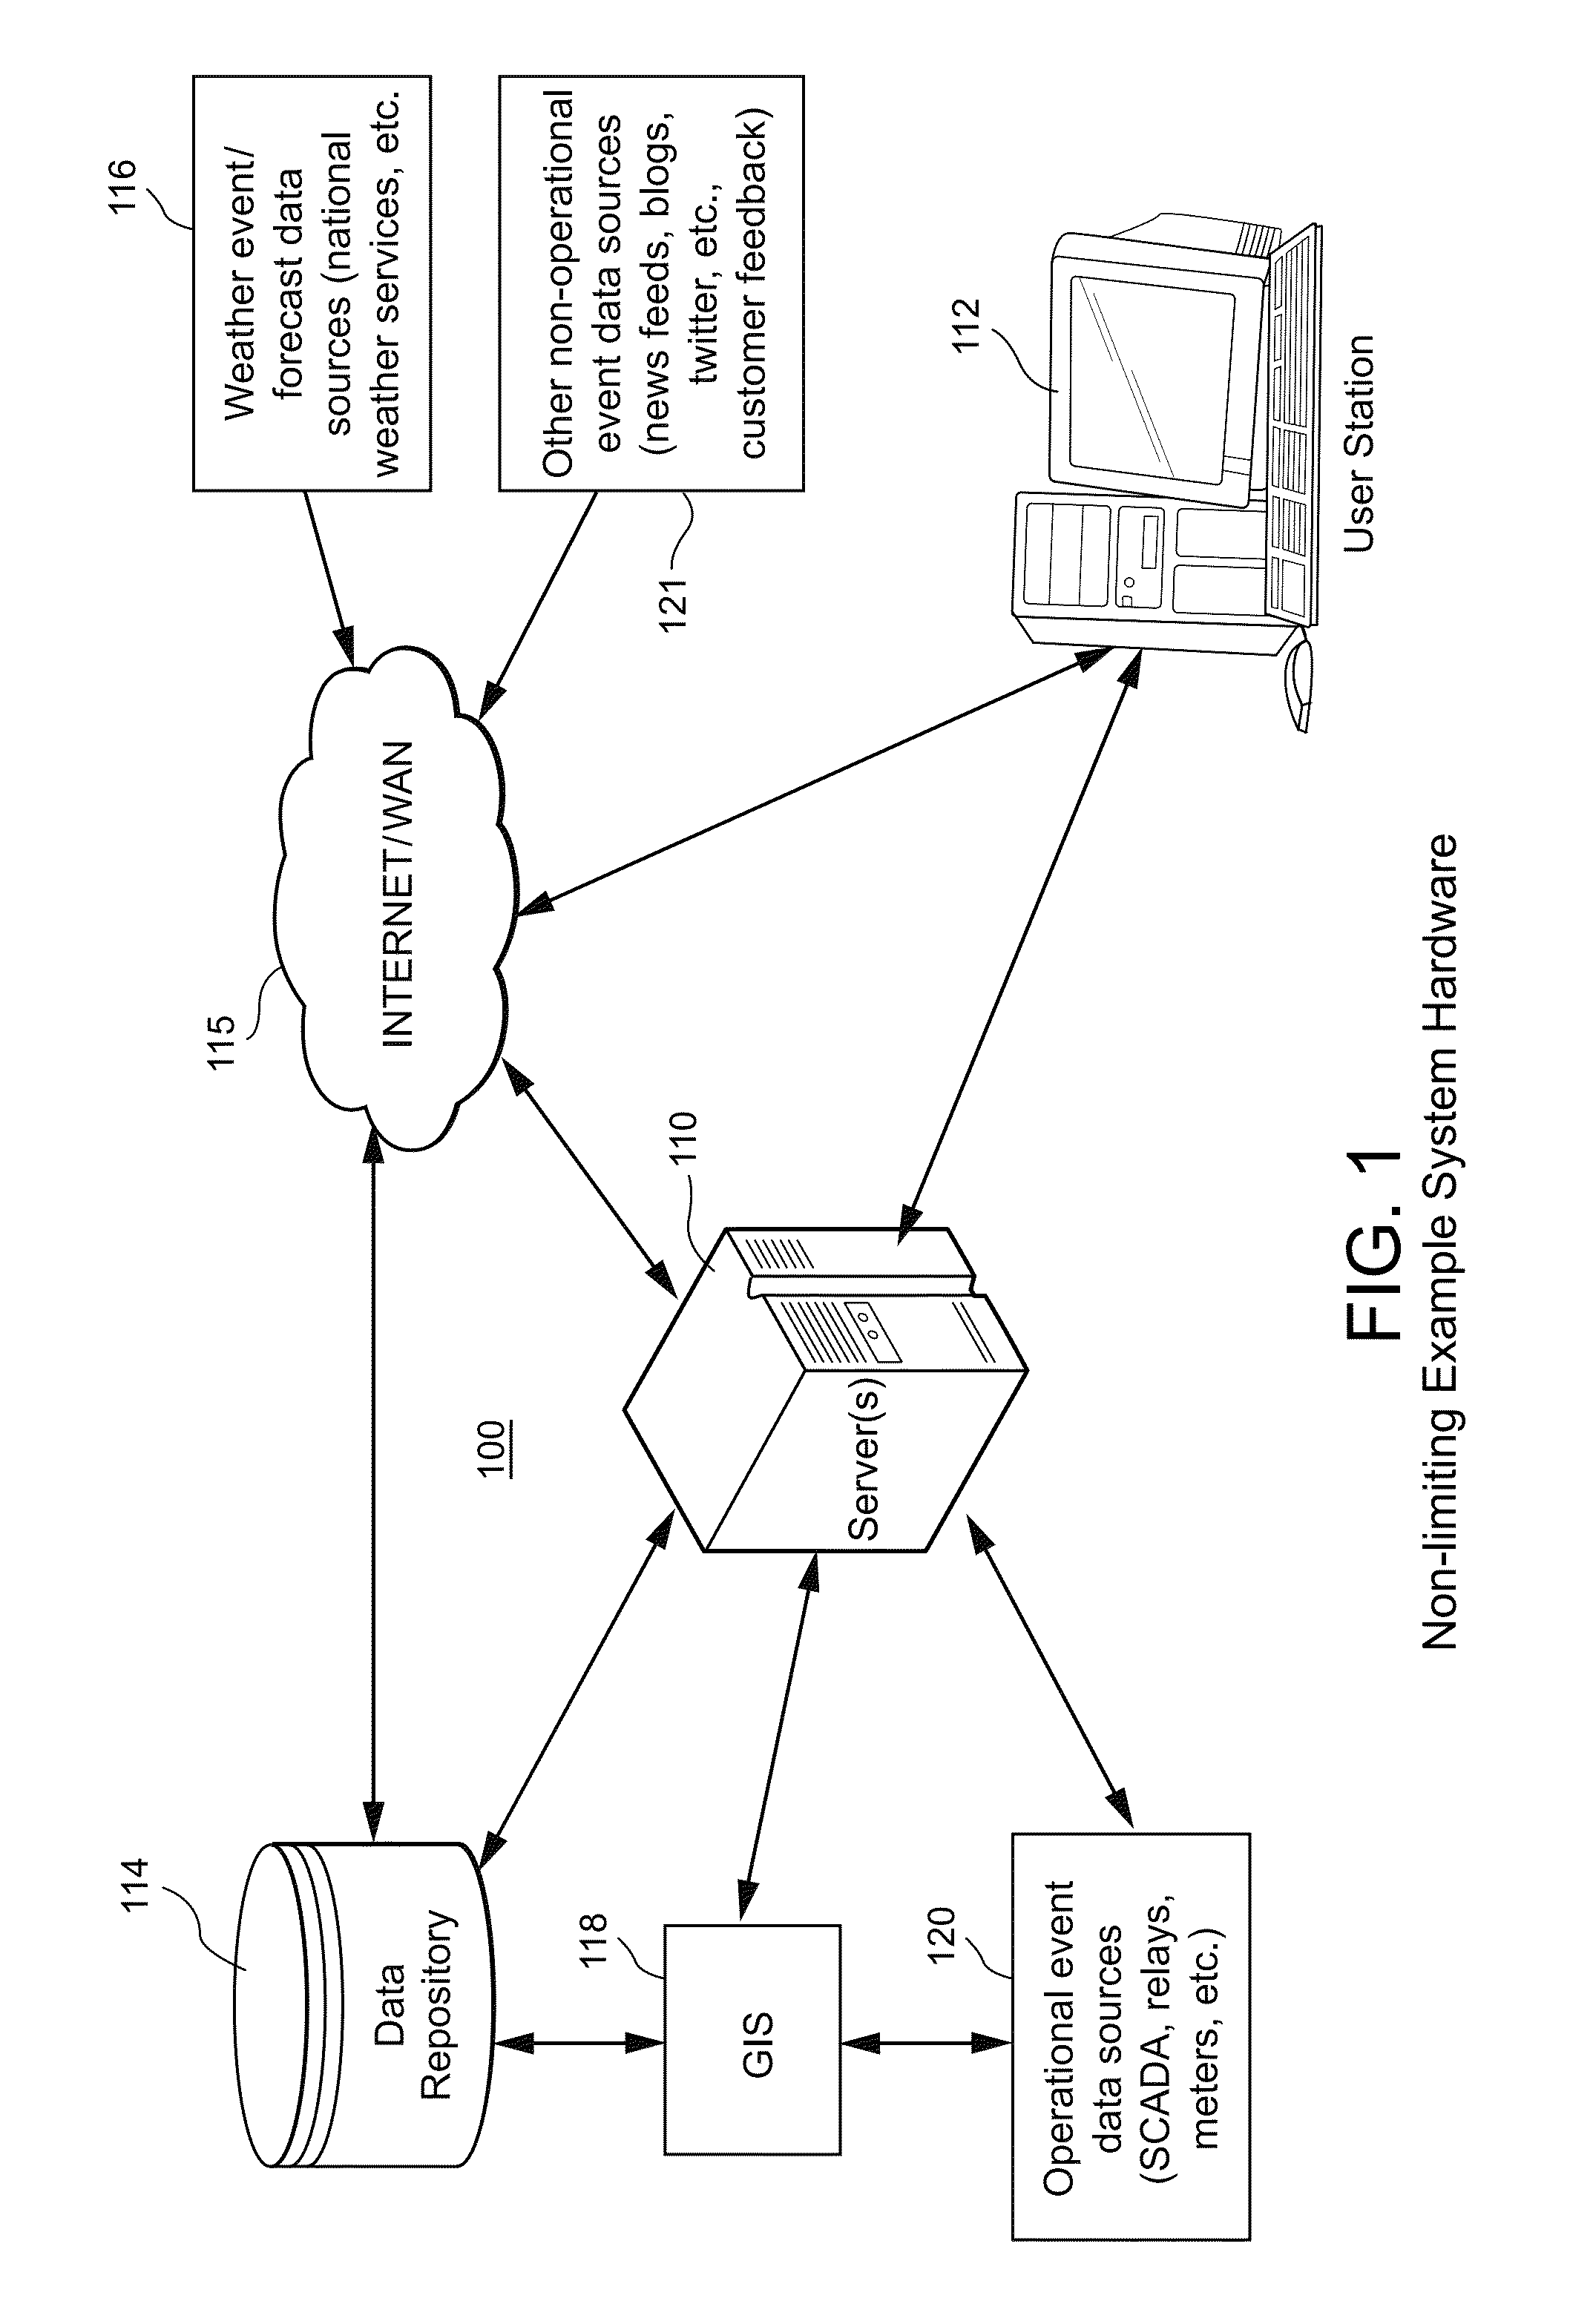 System and method of automated acquisition, correlation and display of power distribution grid operational parameters and weather events